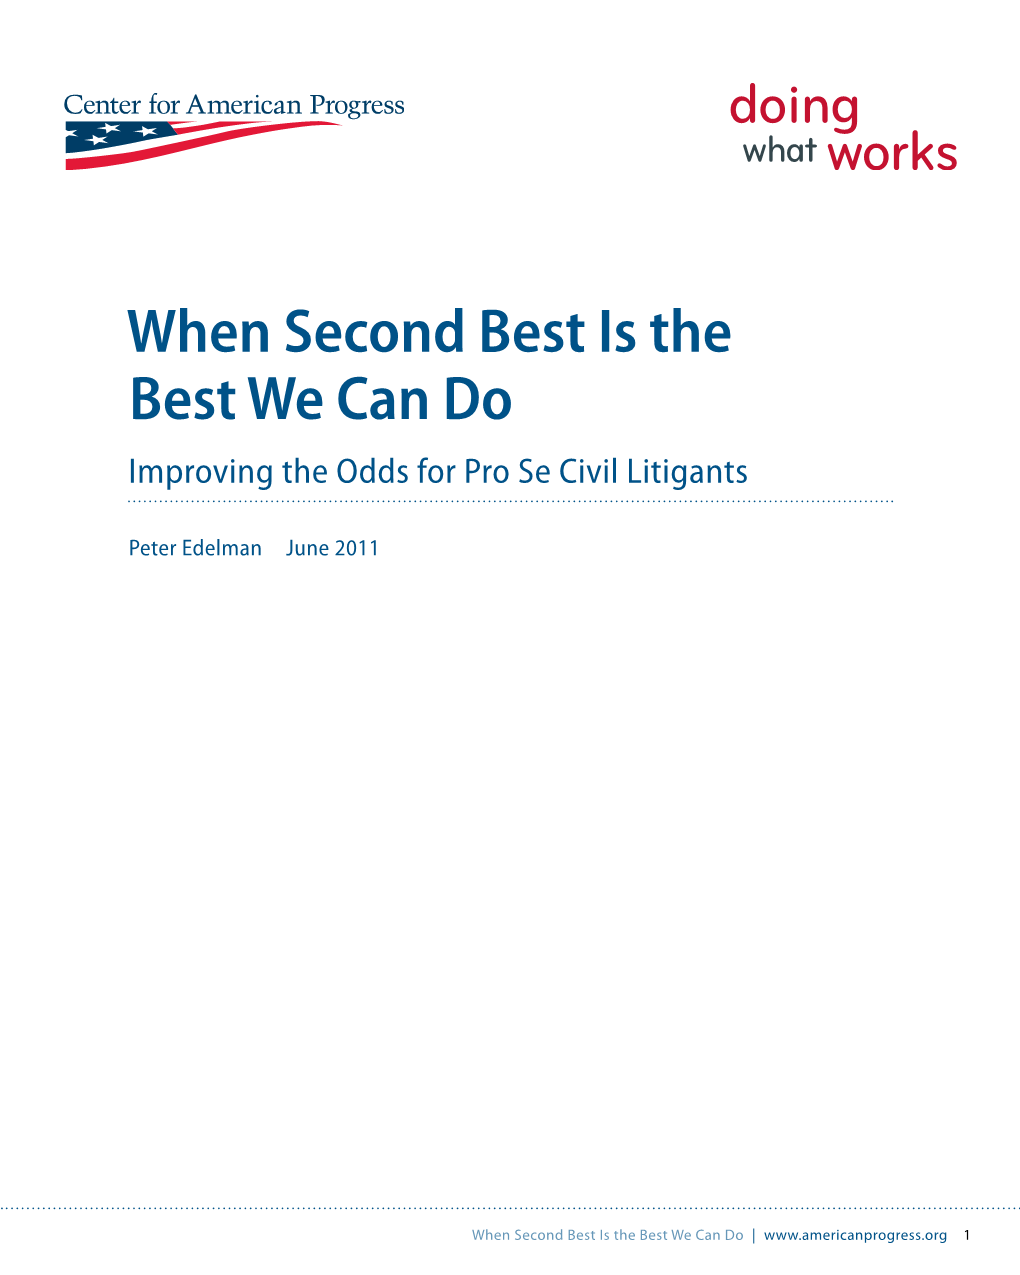 When Second Best Is the Best We Can Do Improving the Odds for Pro Se Civil Litigants